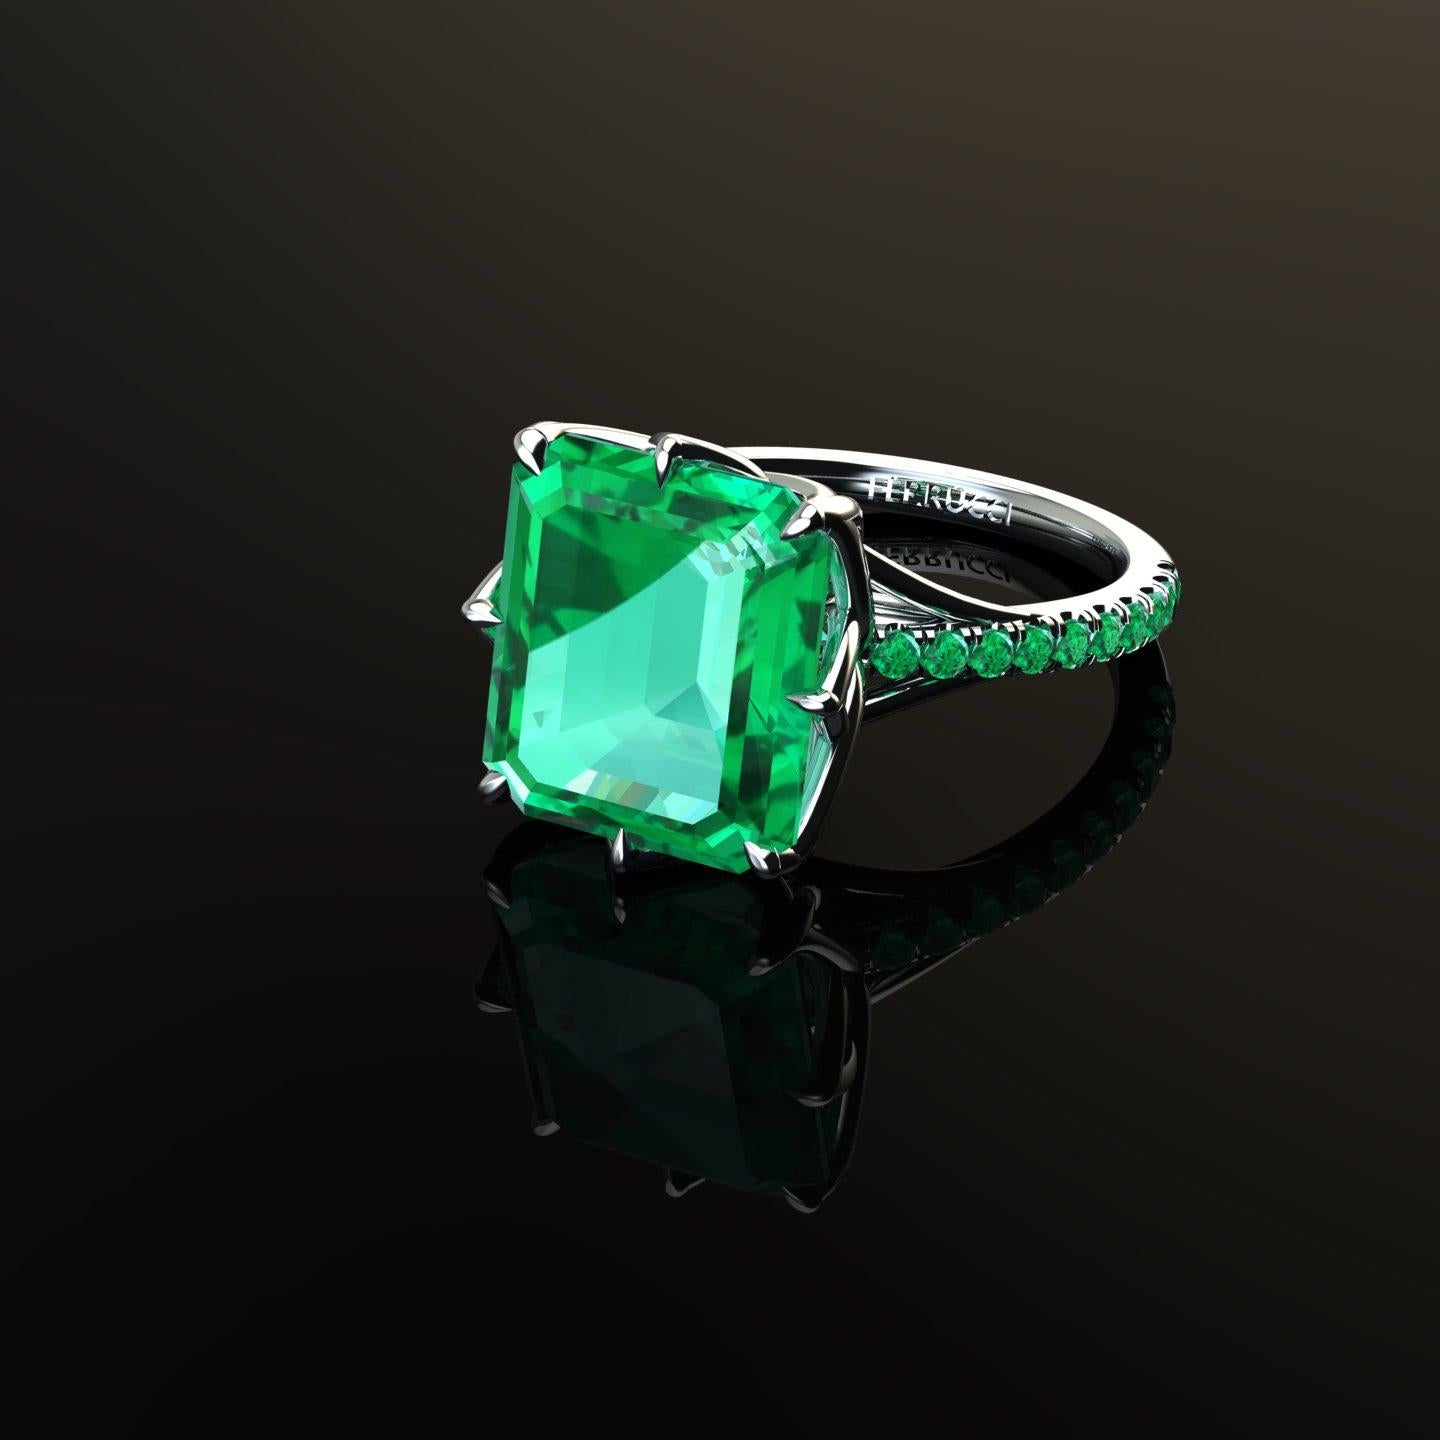 Women's GRS Certified 6.31 Carat Colombian Emerald in Platinum 950 Ring